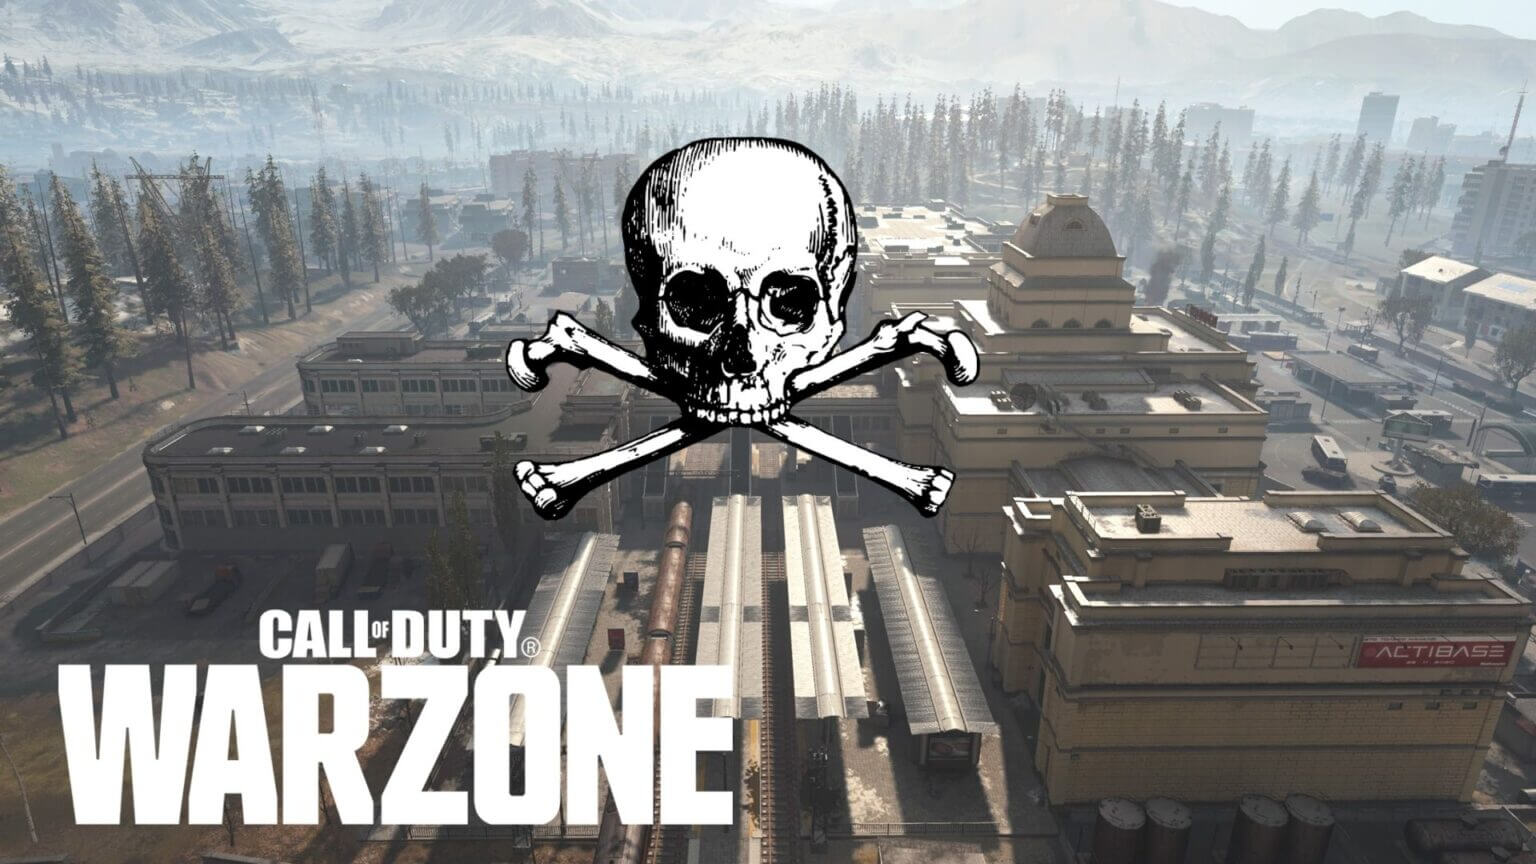 CoD-Warzone-Season-3s-Train-Station-glitch-is-killing-players-instantly-FEATURED-1-1536x864